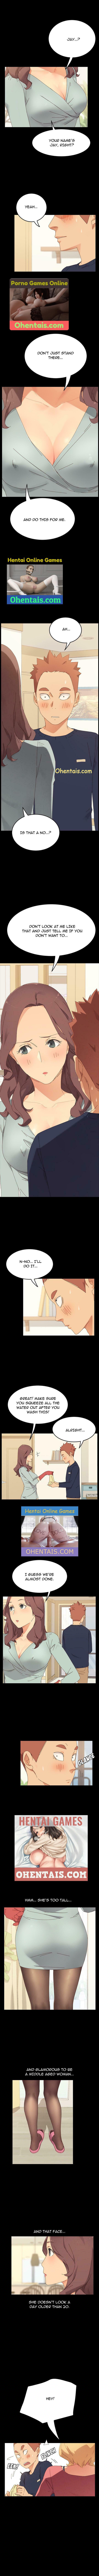 Gay Shorthair PERFECT ROOMMATES Ch. 1 Fodendo - Page 2